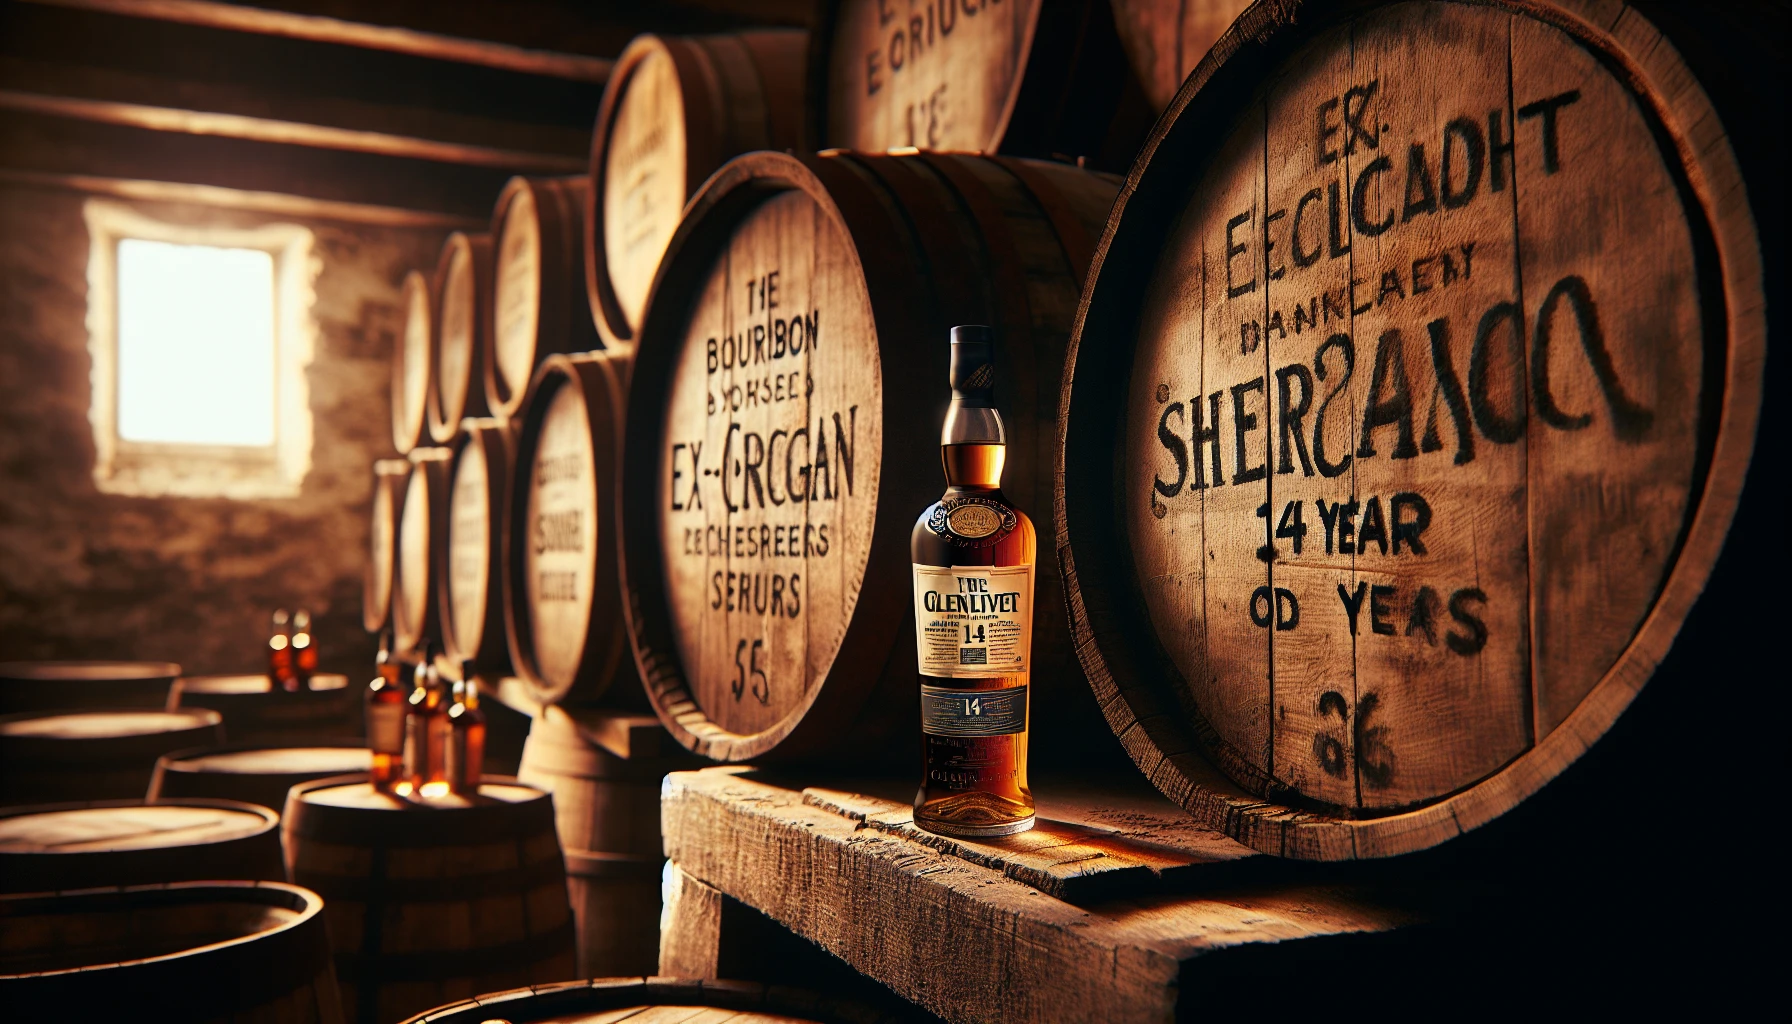 A selection of bourbon, sherry, and ex-cognac casks representing the maturation process of The Glenlivet 14 Year Old